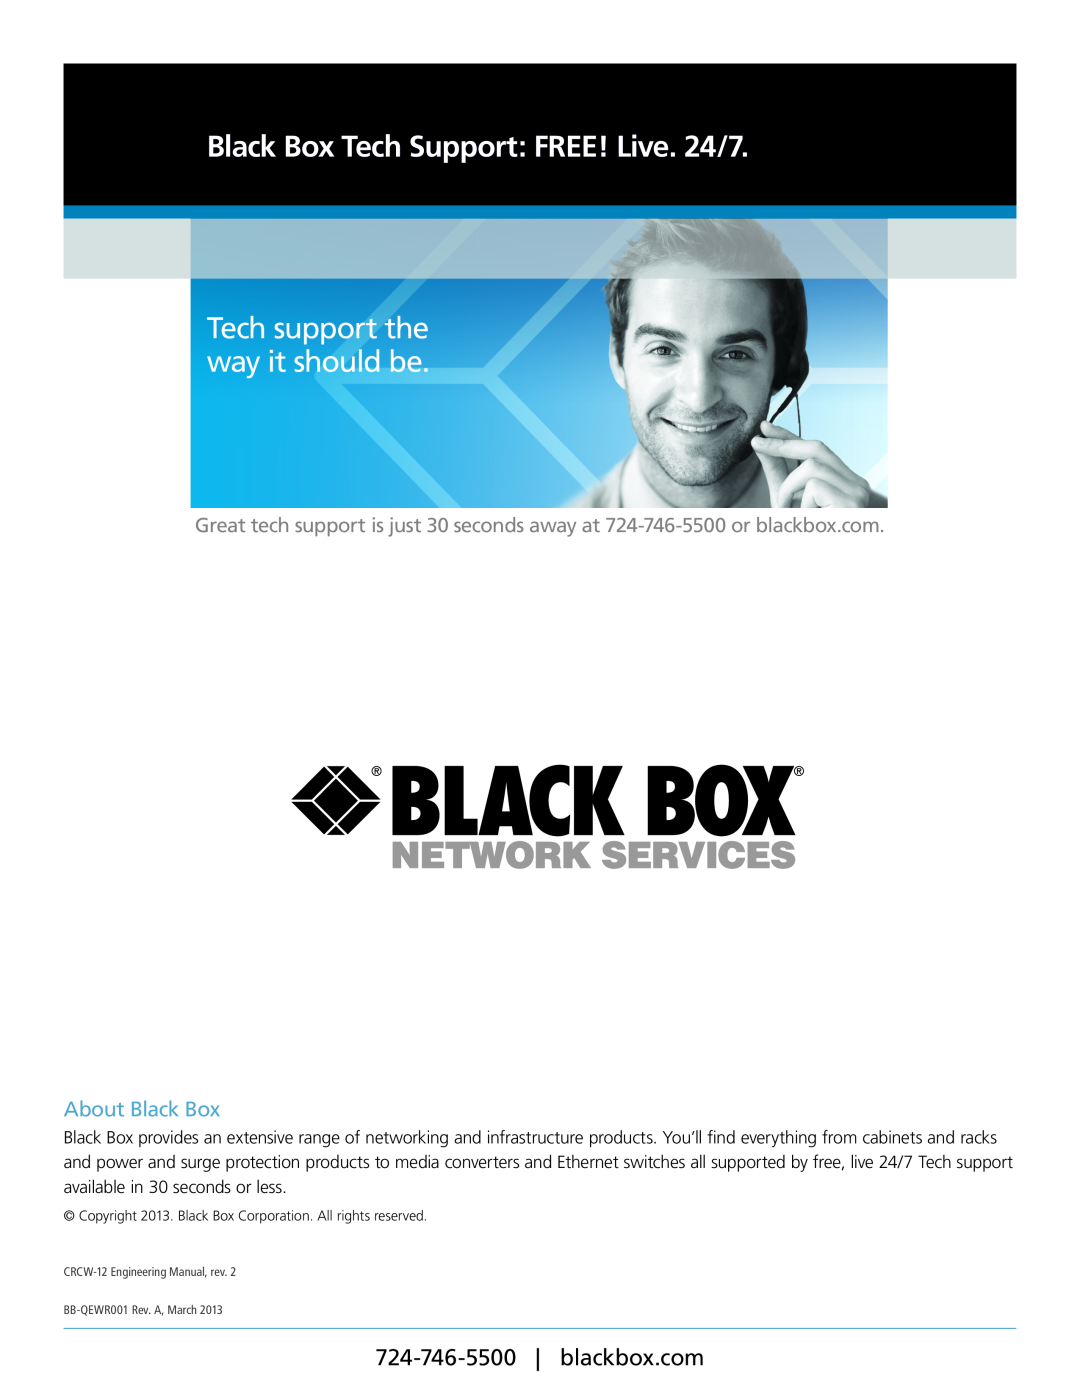 Black Box crcw-12, crcw24 manual Black Box Tech Support FREE! Live. 24/7, Tech support the way it should be, About Black Box 